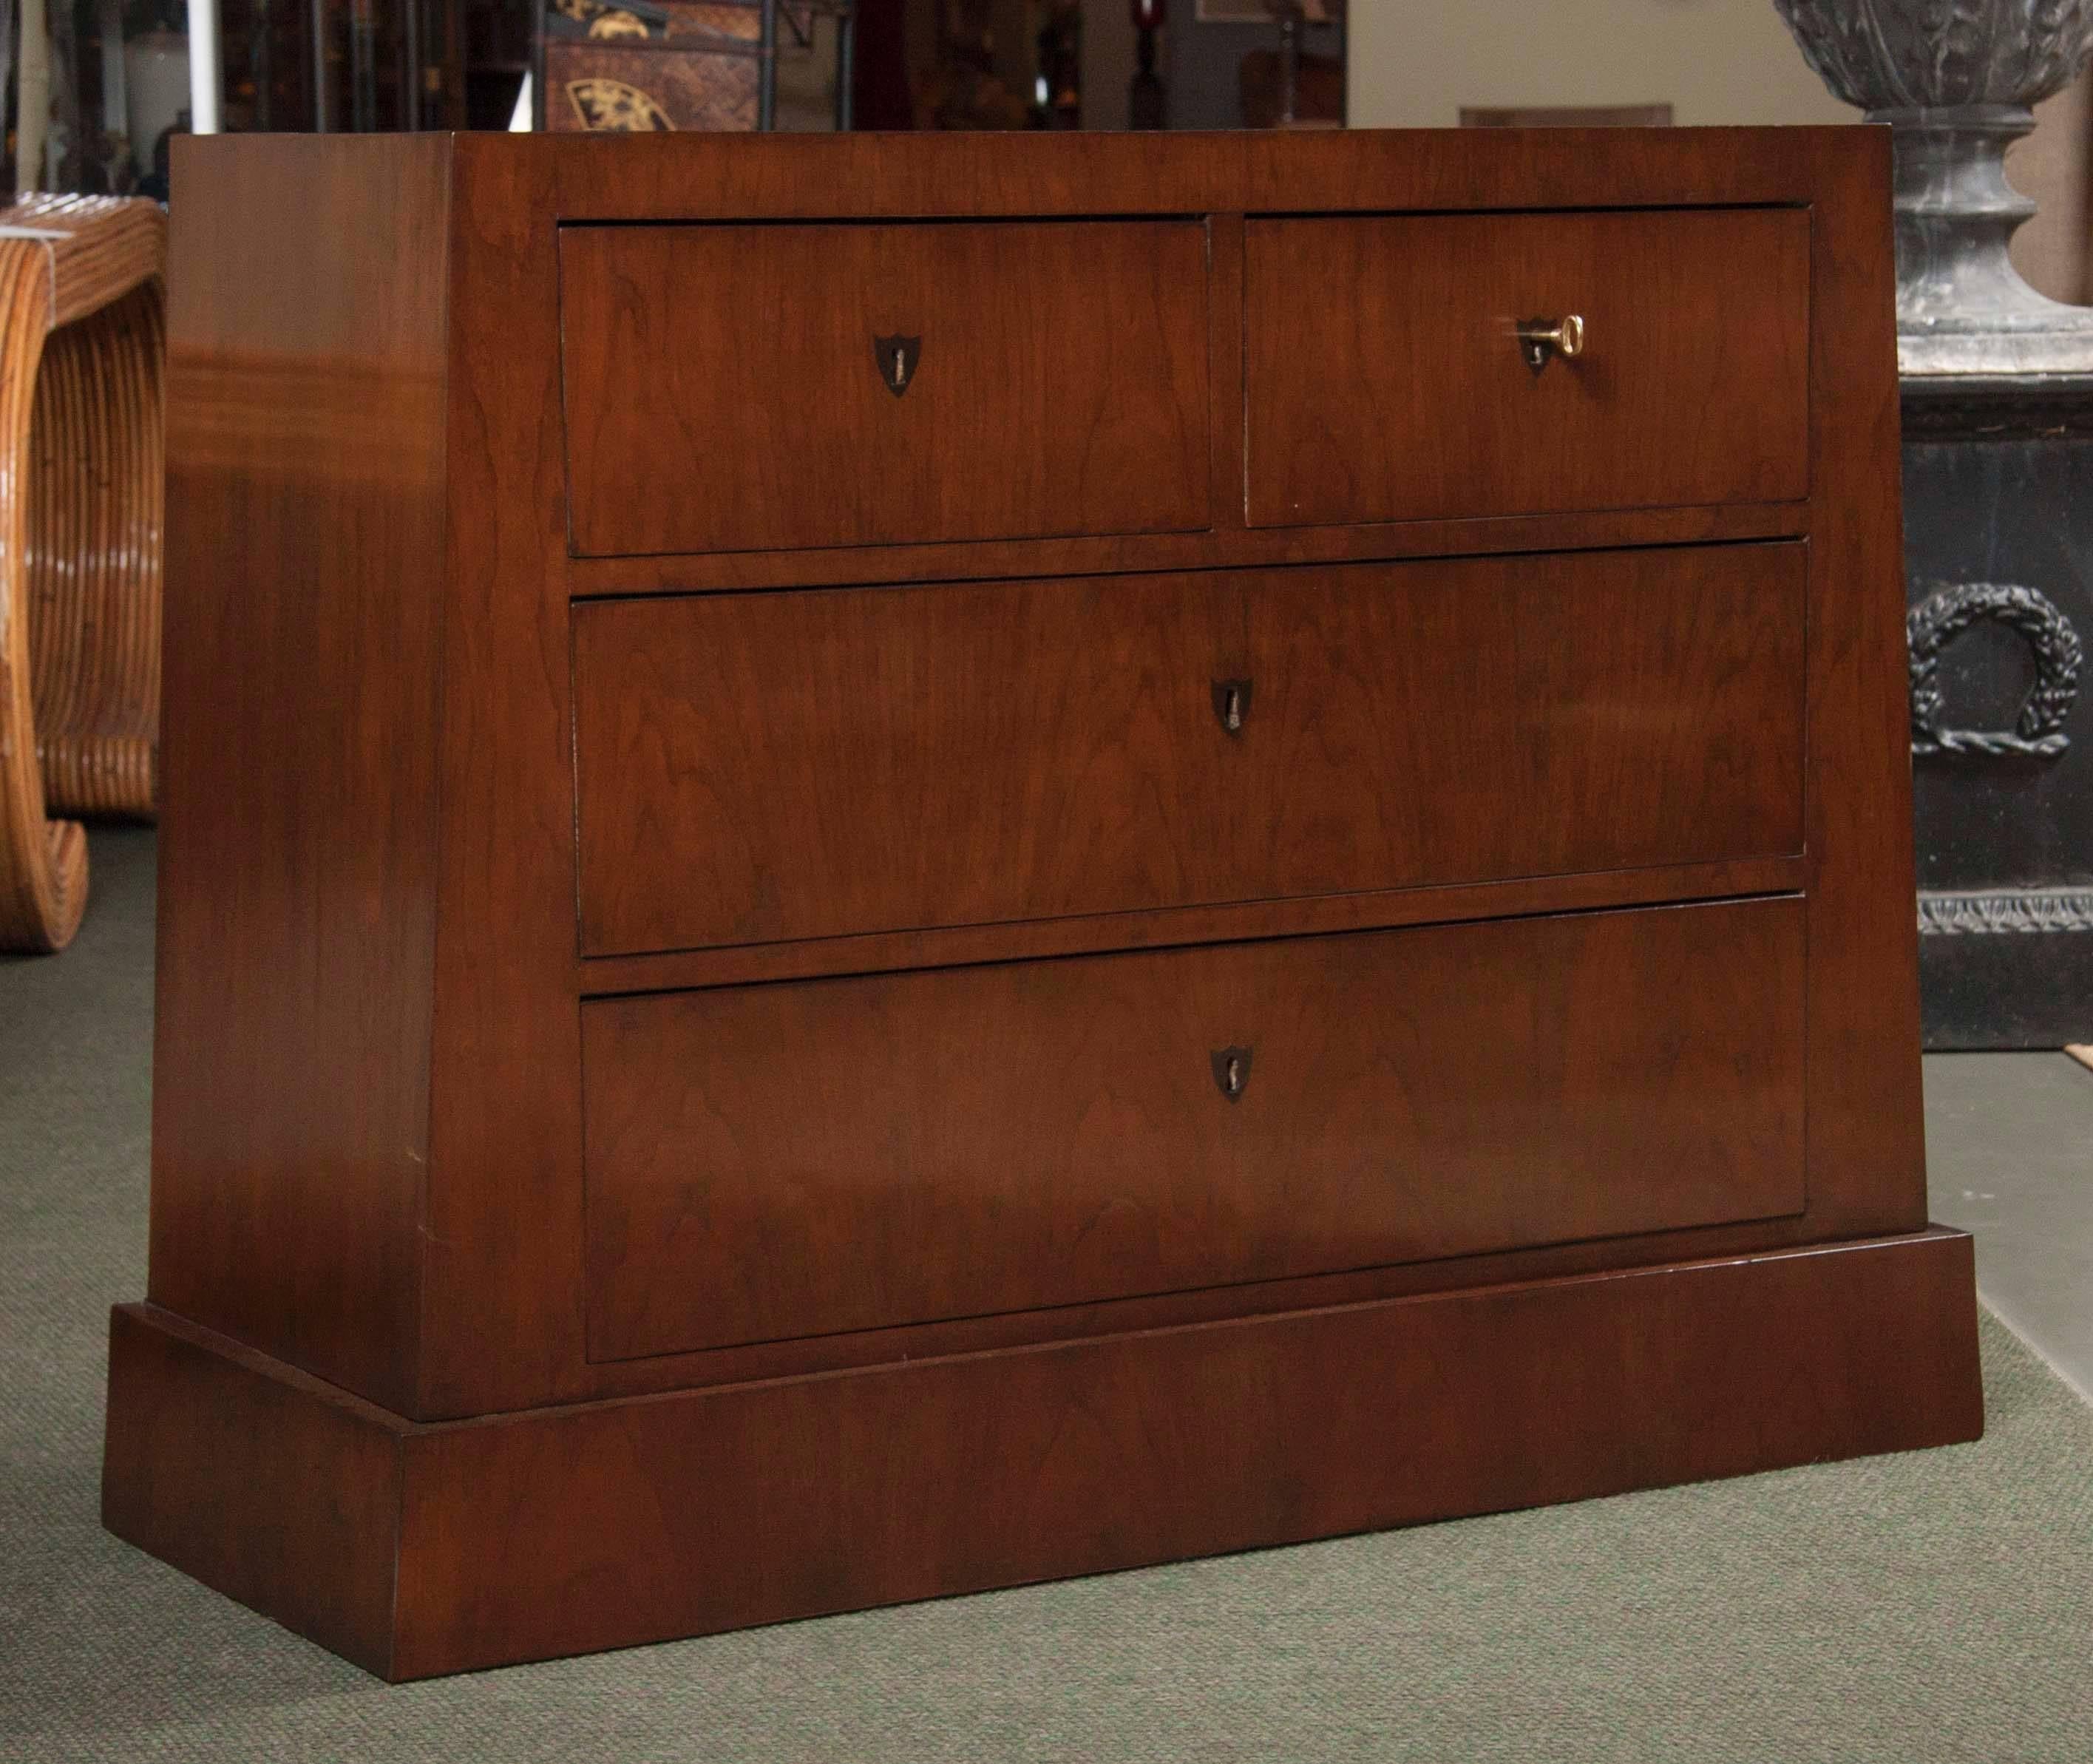 A strong Biedermeier fruitwood four-drawer commode with walnut stain and having angled sides. Fully restored.